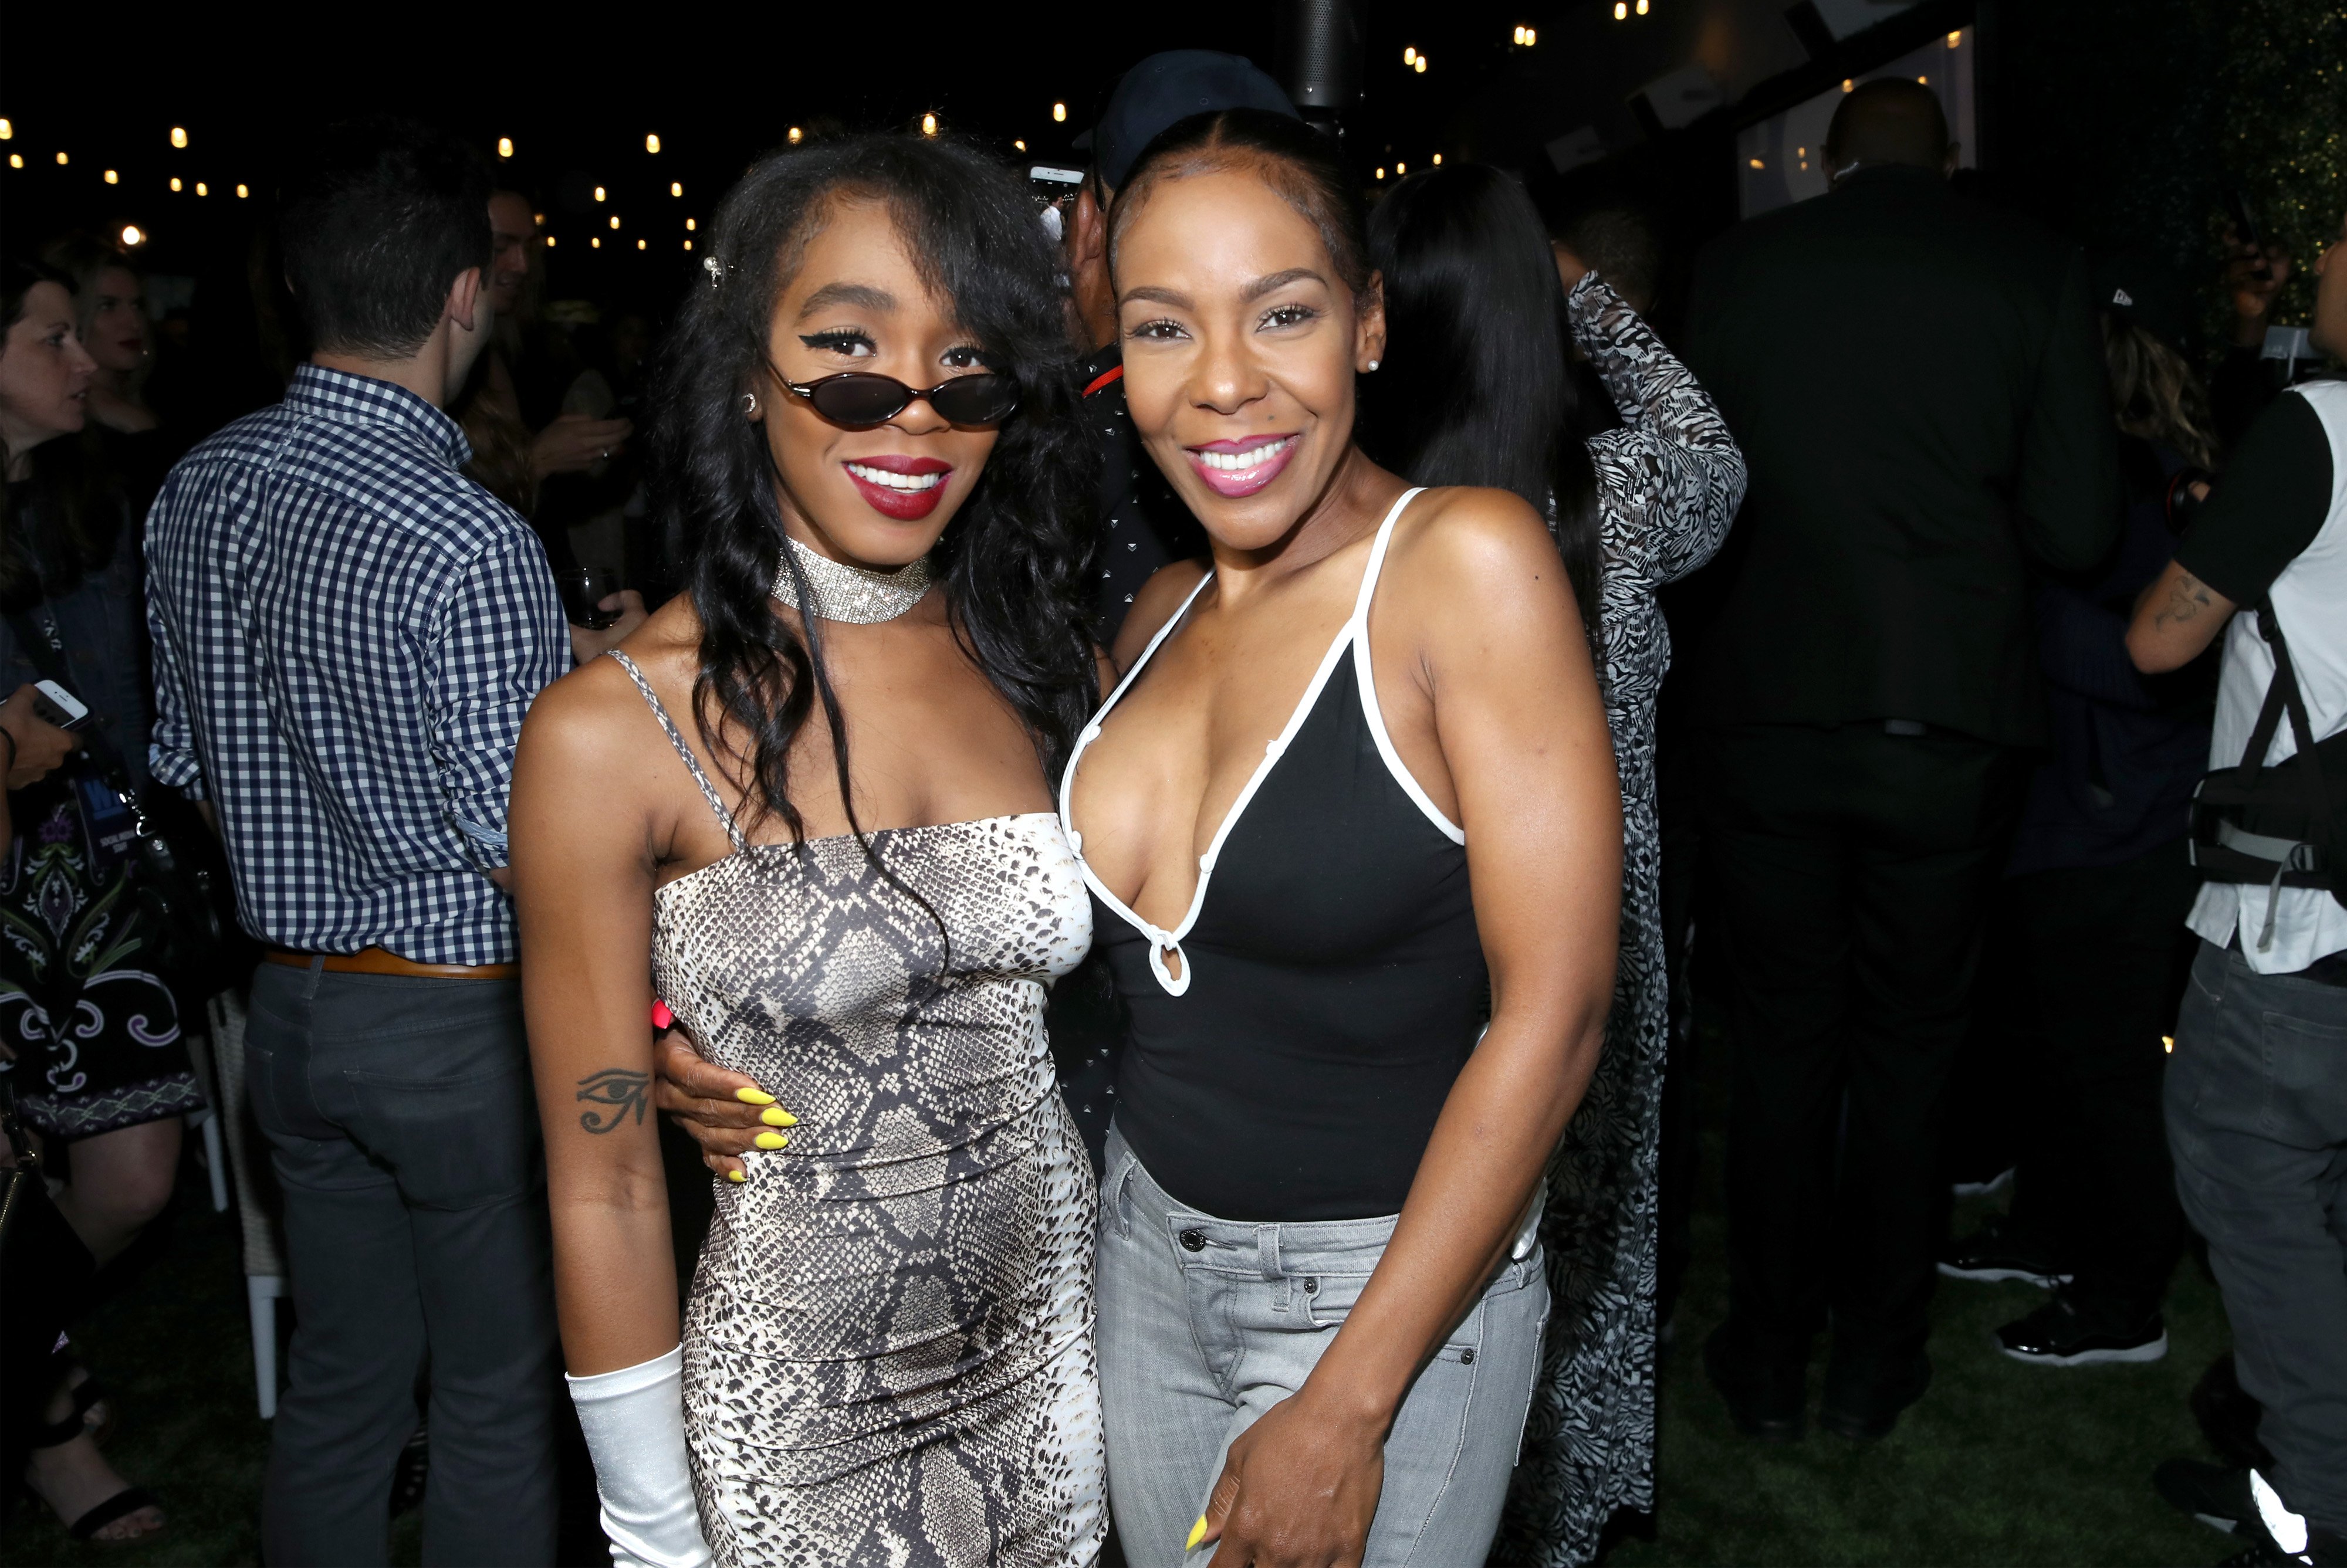 Buku Abi (Joann Kelly) and Drea Kelly attend WE tv "Power, Influence & Hip Hop: The Remarkable Rise Of So So Def" celebration and Season 3 of "Growing Up Hip Hop Atlanta" on July 16, 2019, California. | Source: Getty Images